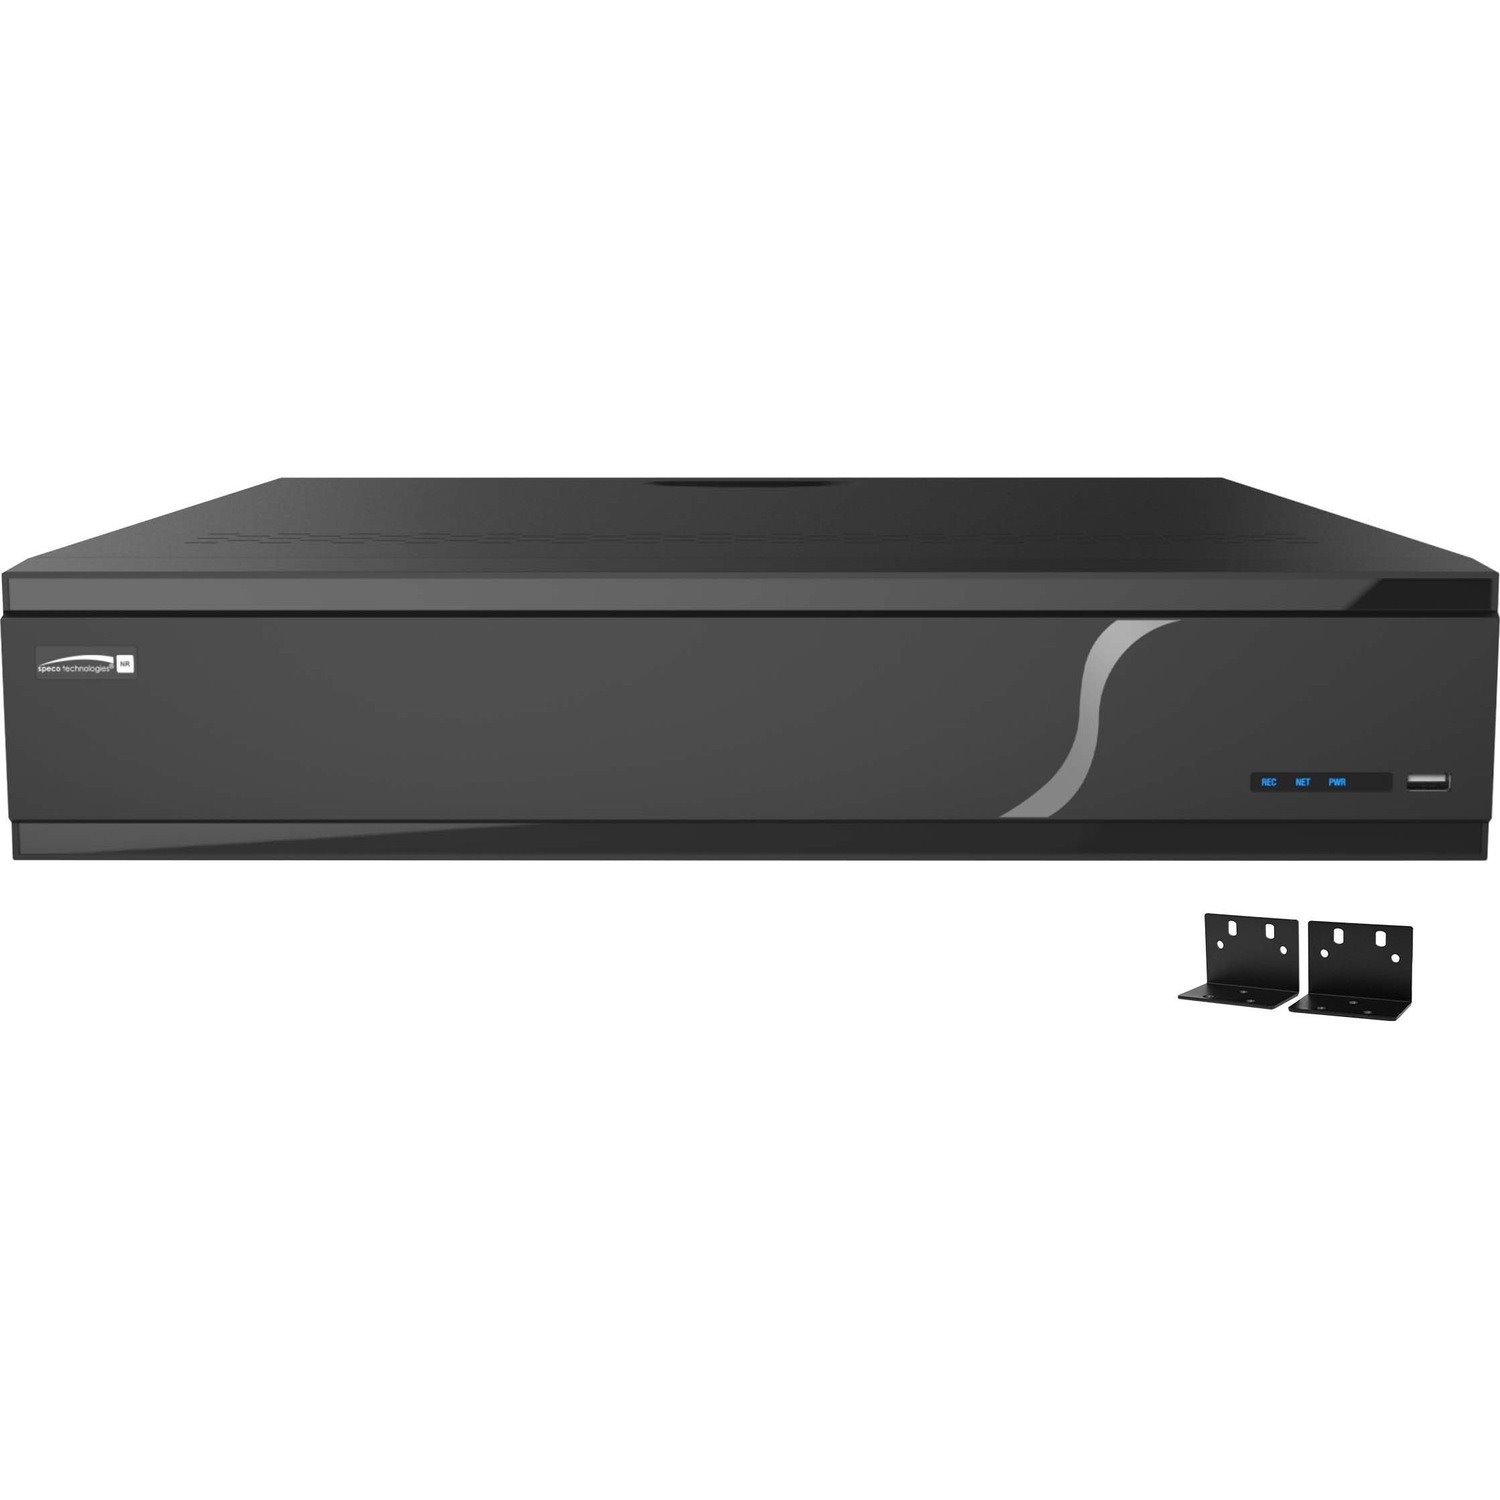 Speco 4K H.265 Network Video Recorder with Smart Analytics - 112 TB HDD